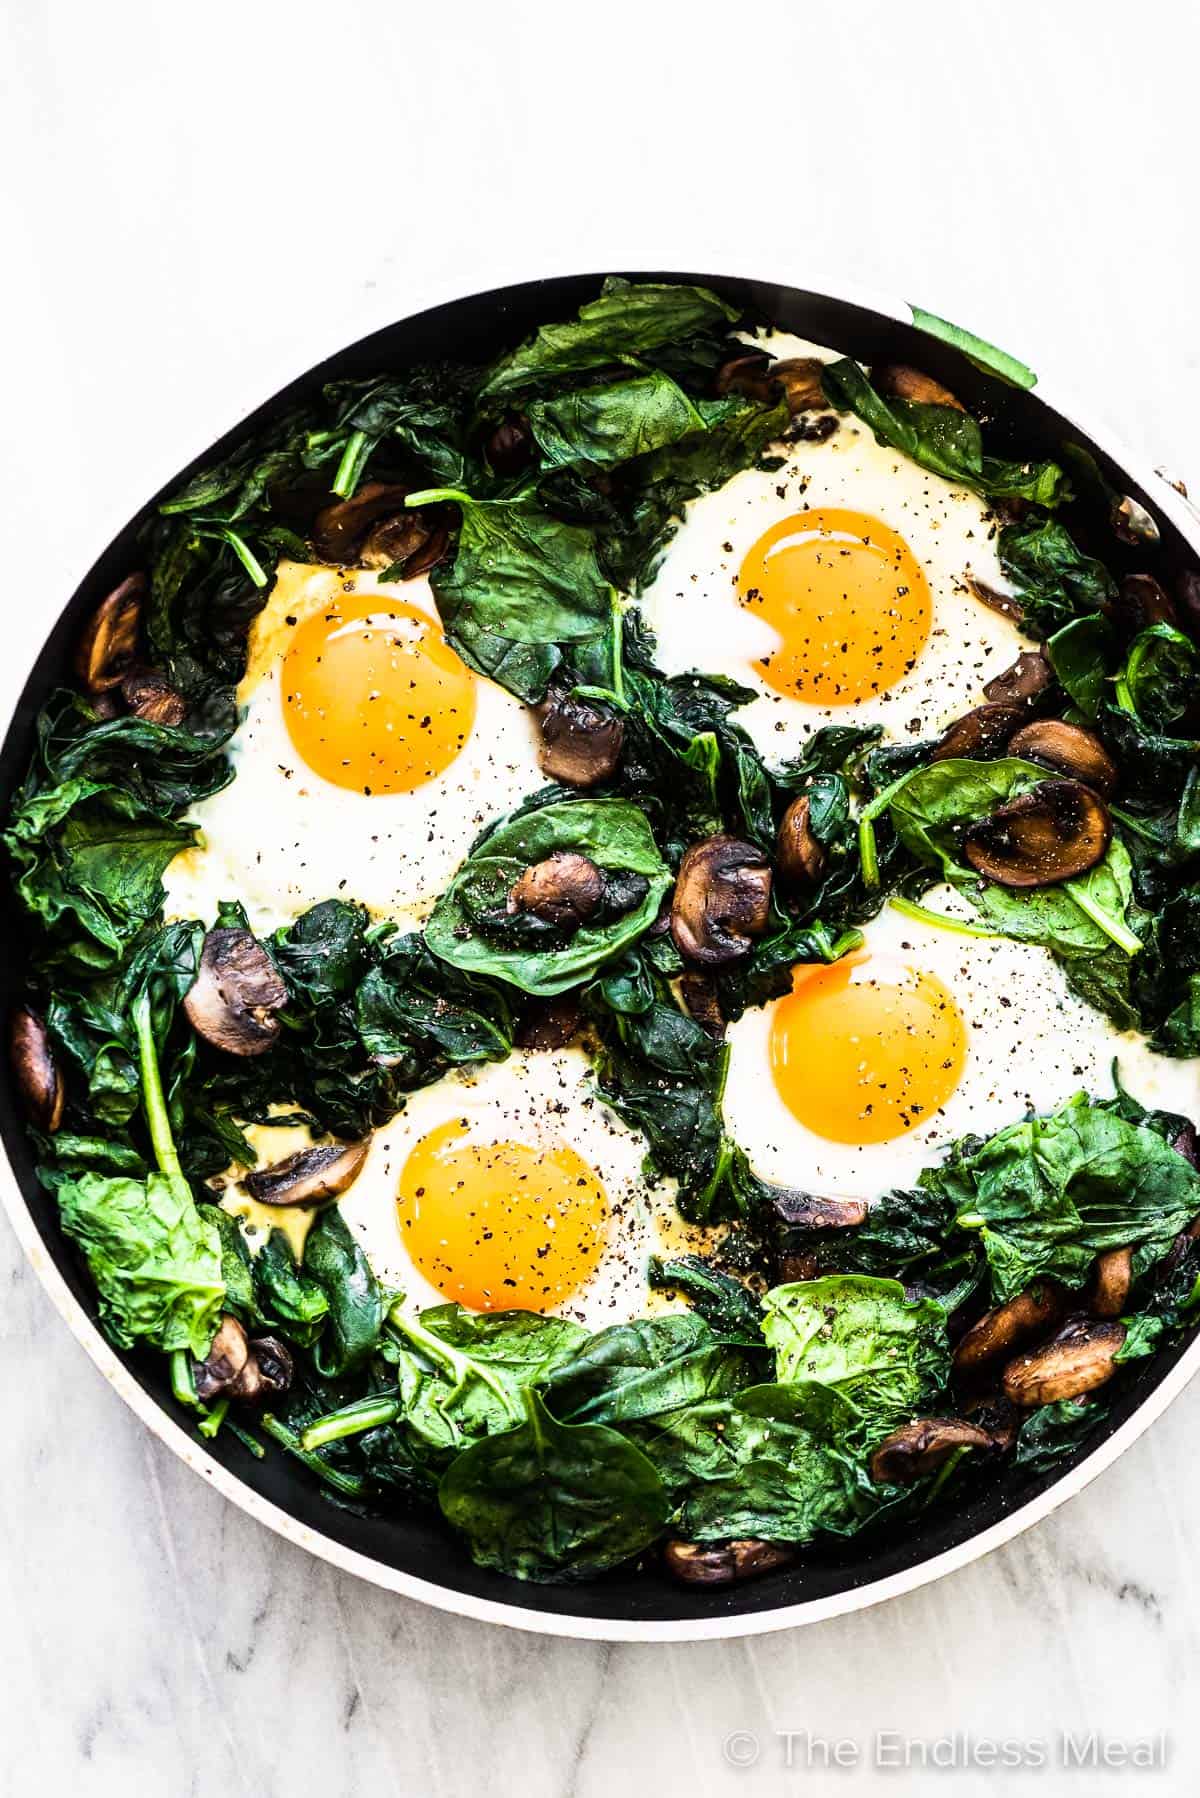 Spinach and Eggs Image